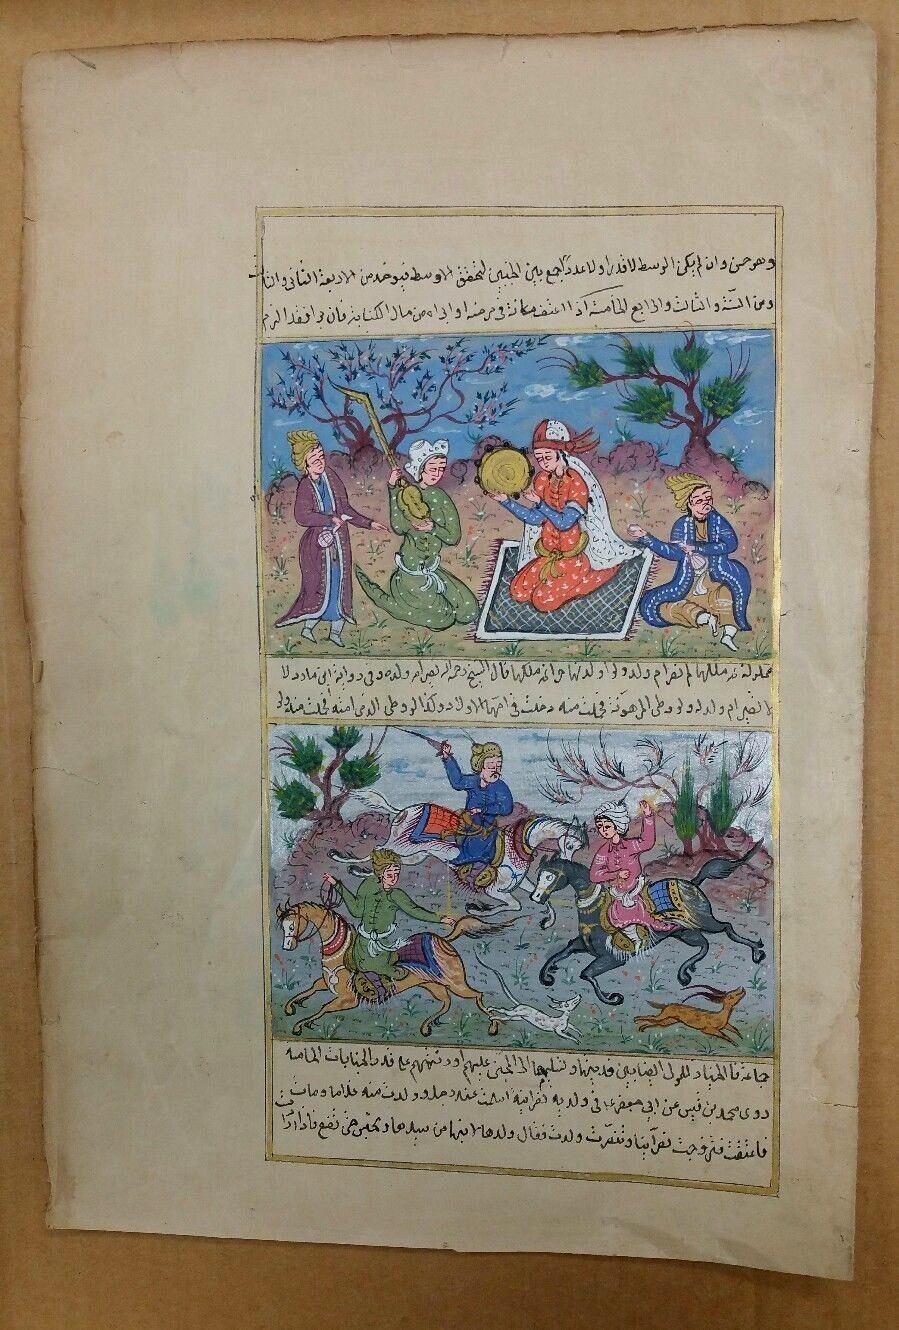 ANTIQUE HAND PAINTED ON THE PAPER MINIATURE ARABIC HAND WRITTEN 